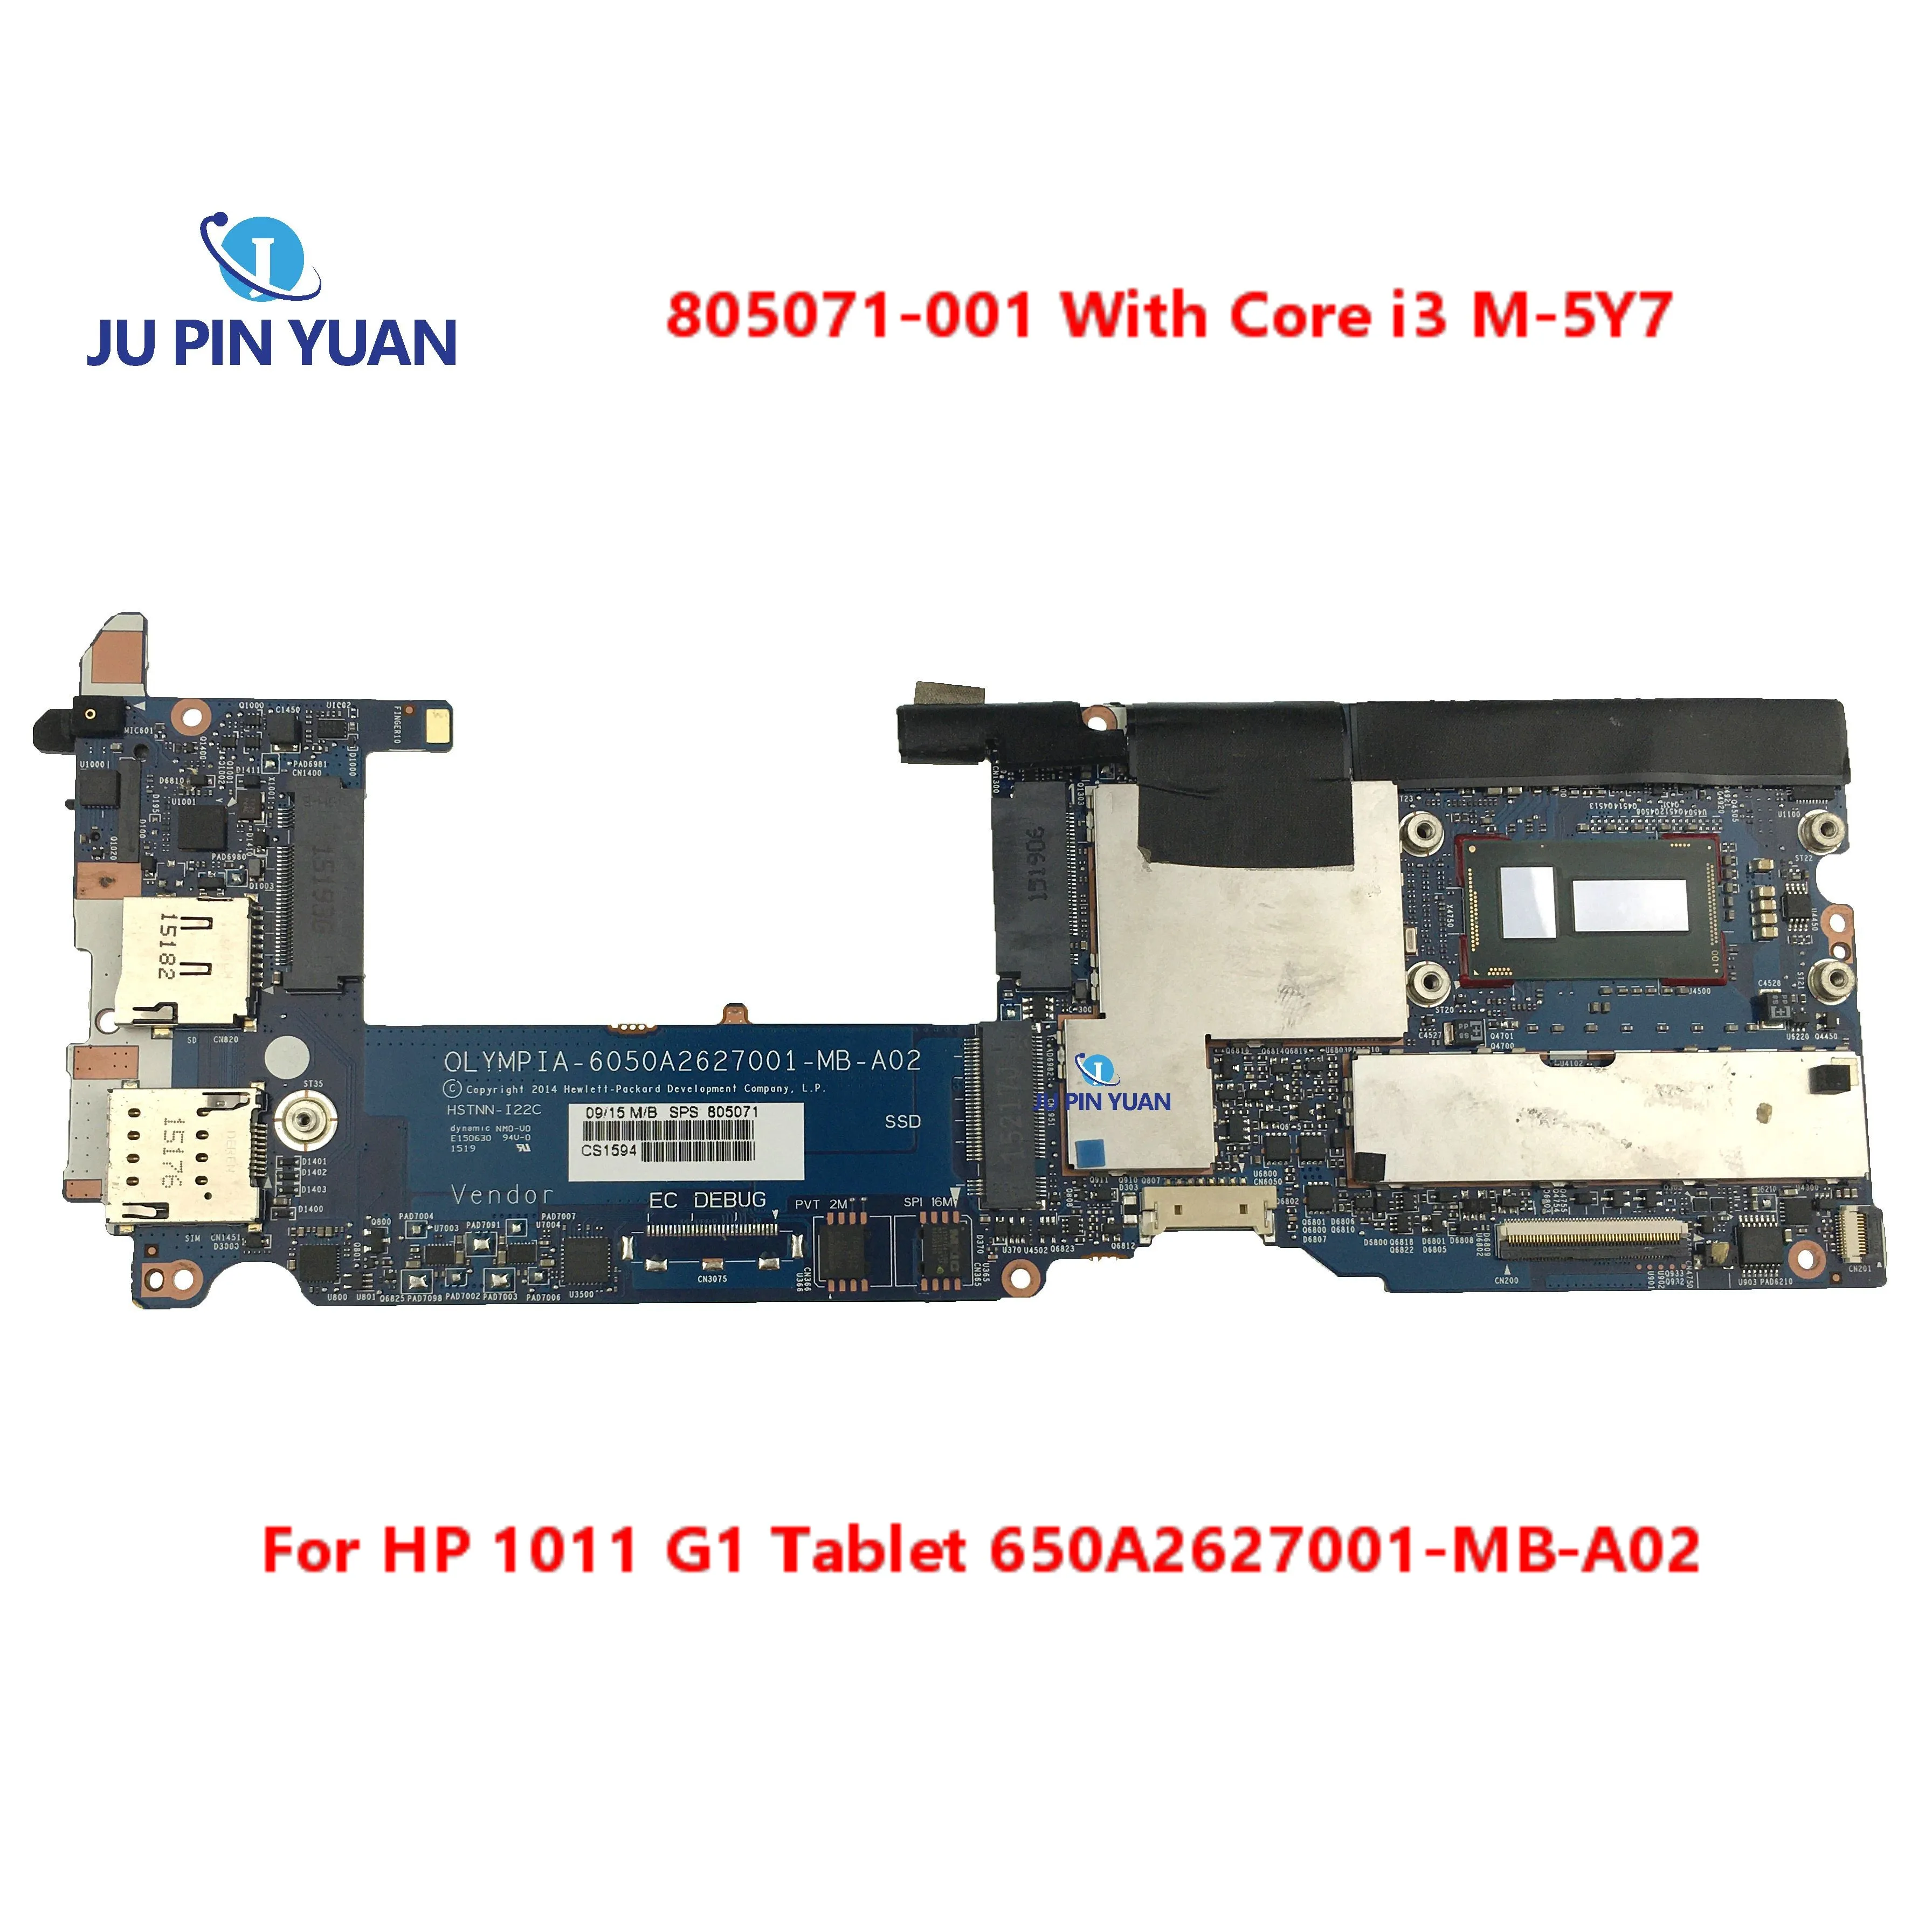 

805071-001 805071-601 For HP 1011 G1 Tablet Laptop Motherboard 650A2627001-MB-A02 With Core i3 M-5Y71